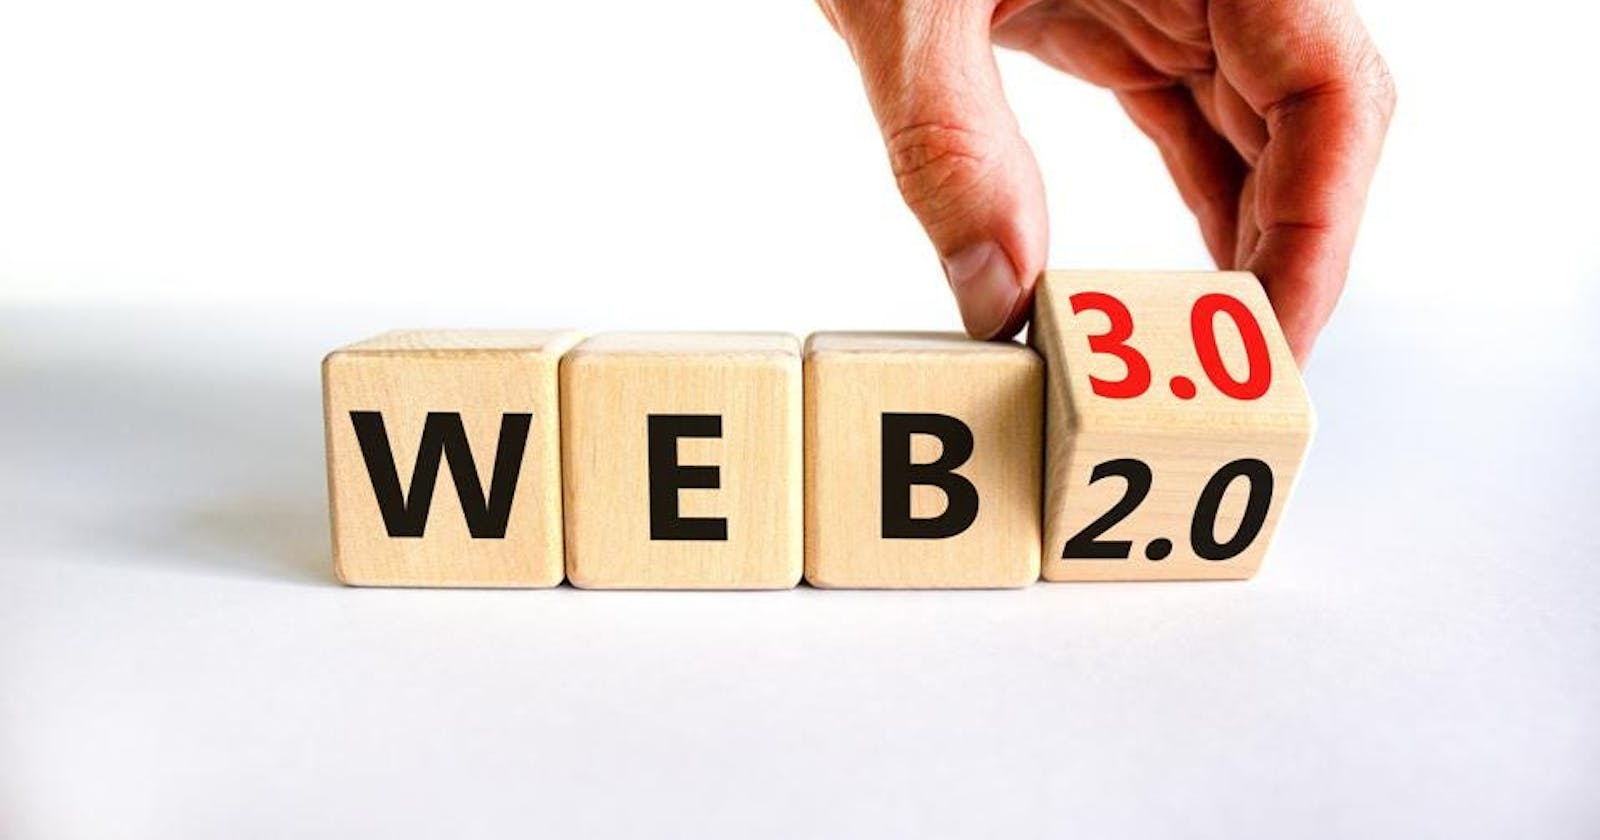 Web 2.0 vs Web 3.0: The major difference.